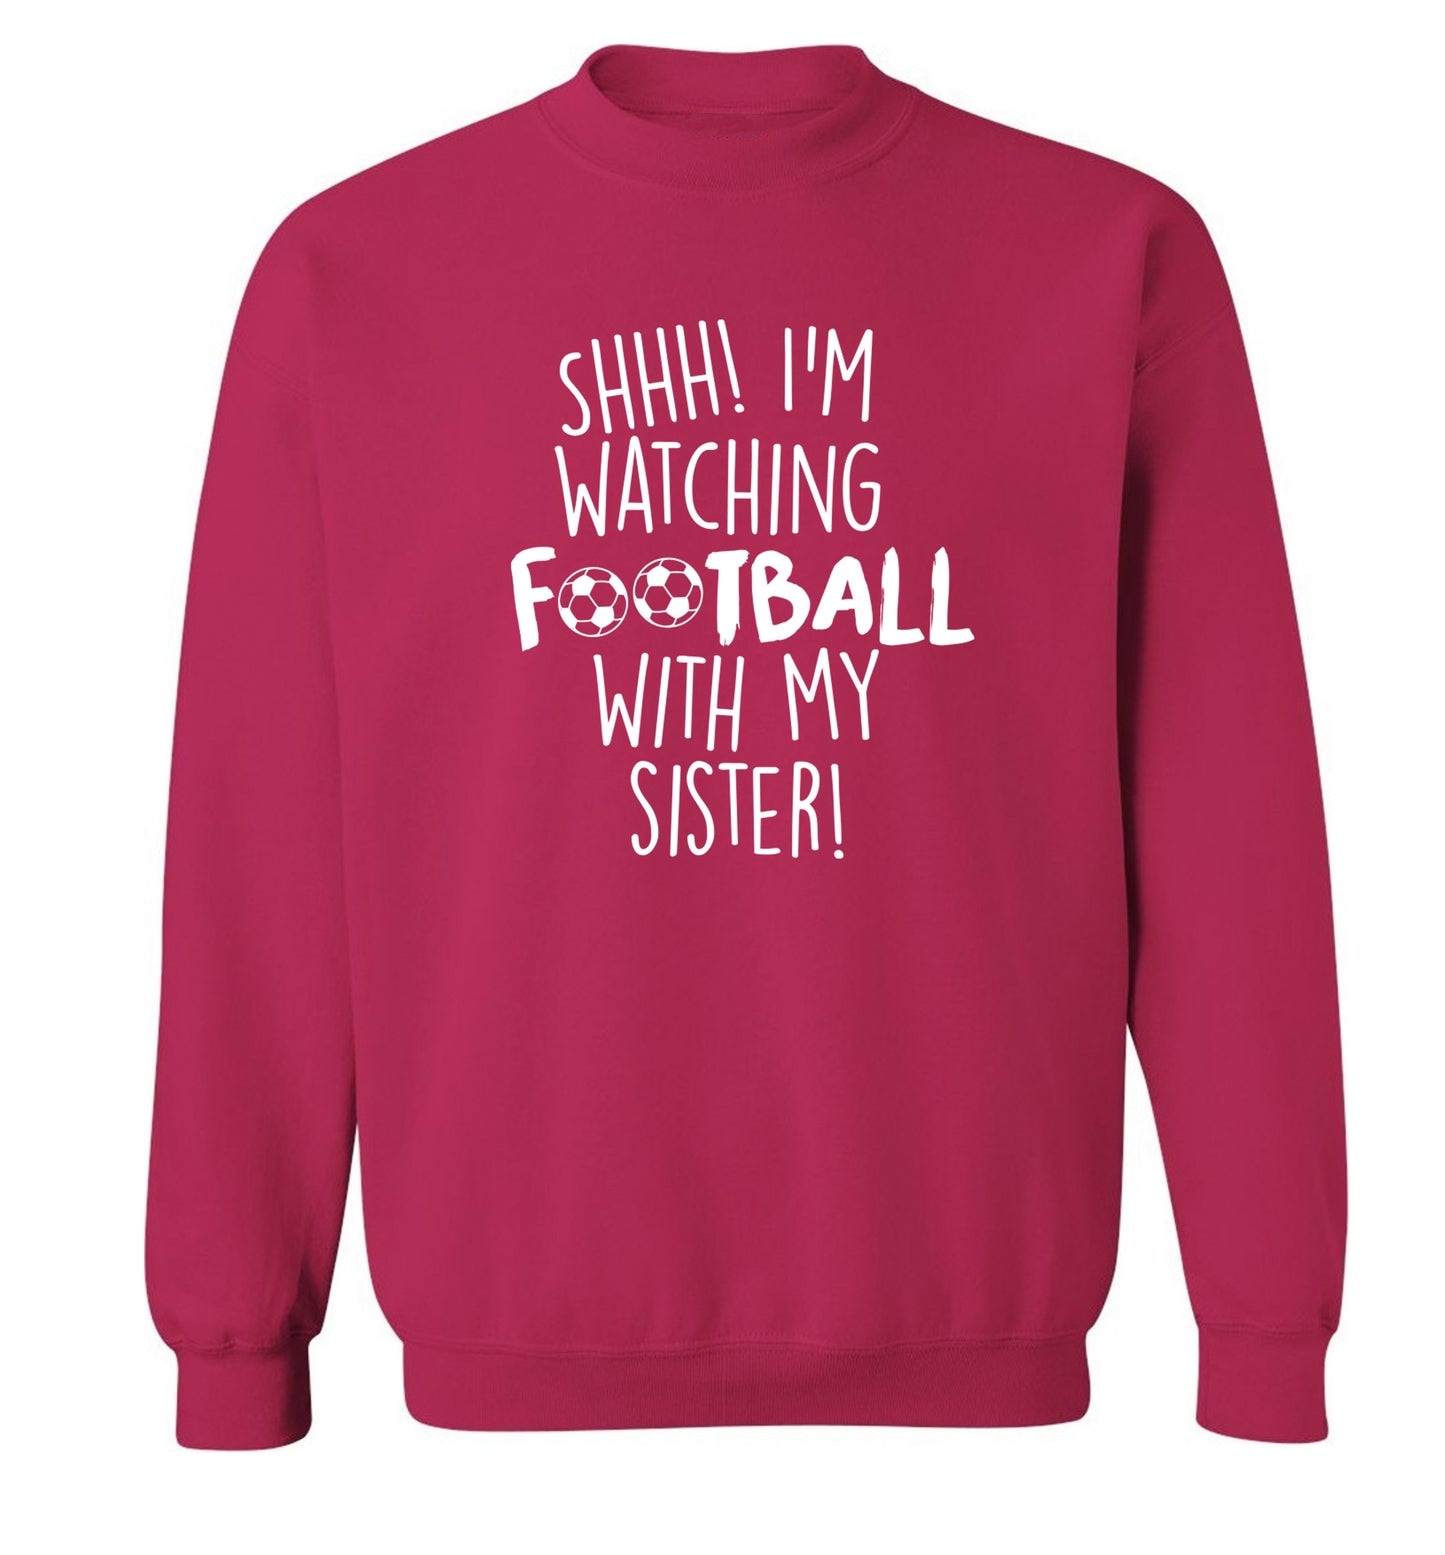 Shhh I'm watching football with my sister Adult's unisexpink Sweater 2XL